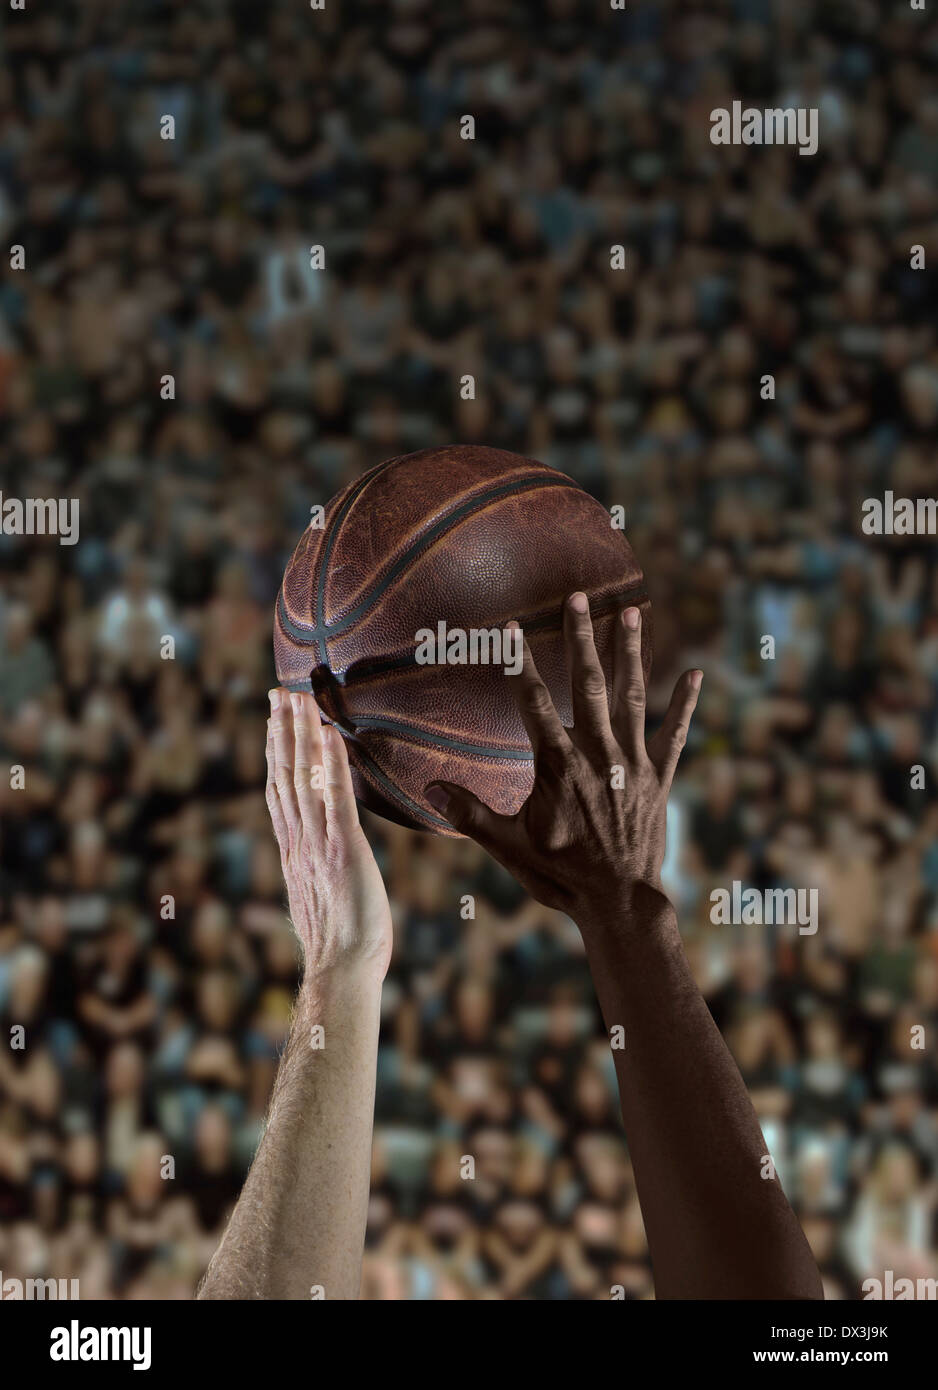 White Caucasian and Black African American Hands & Arms During Tip Off In Basketball Game Stock Photo